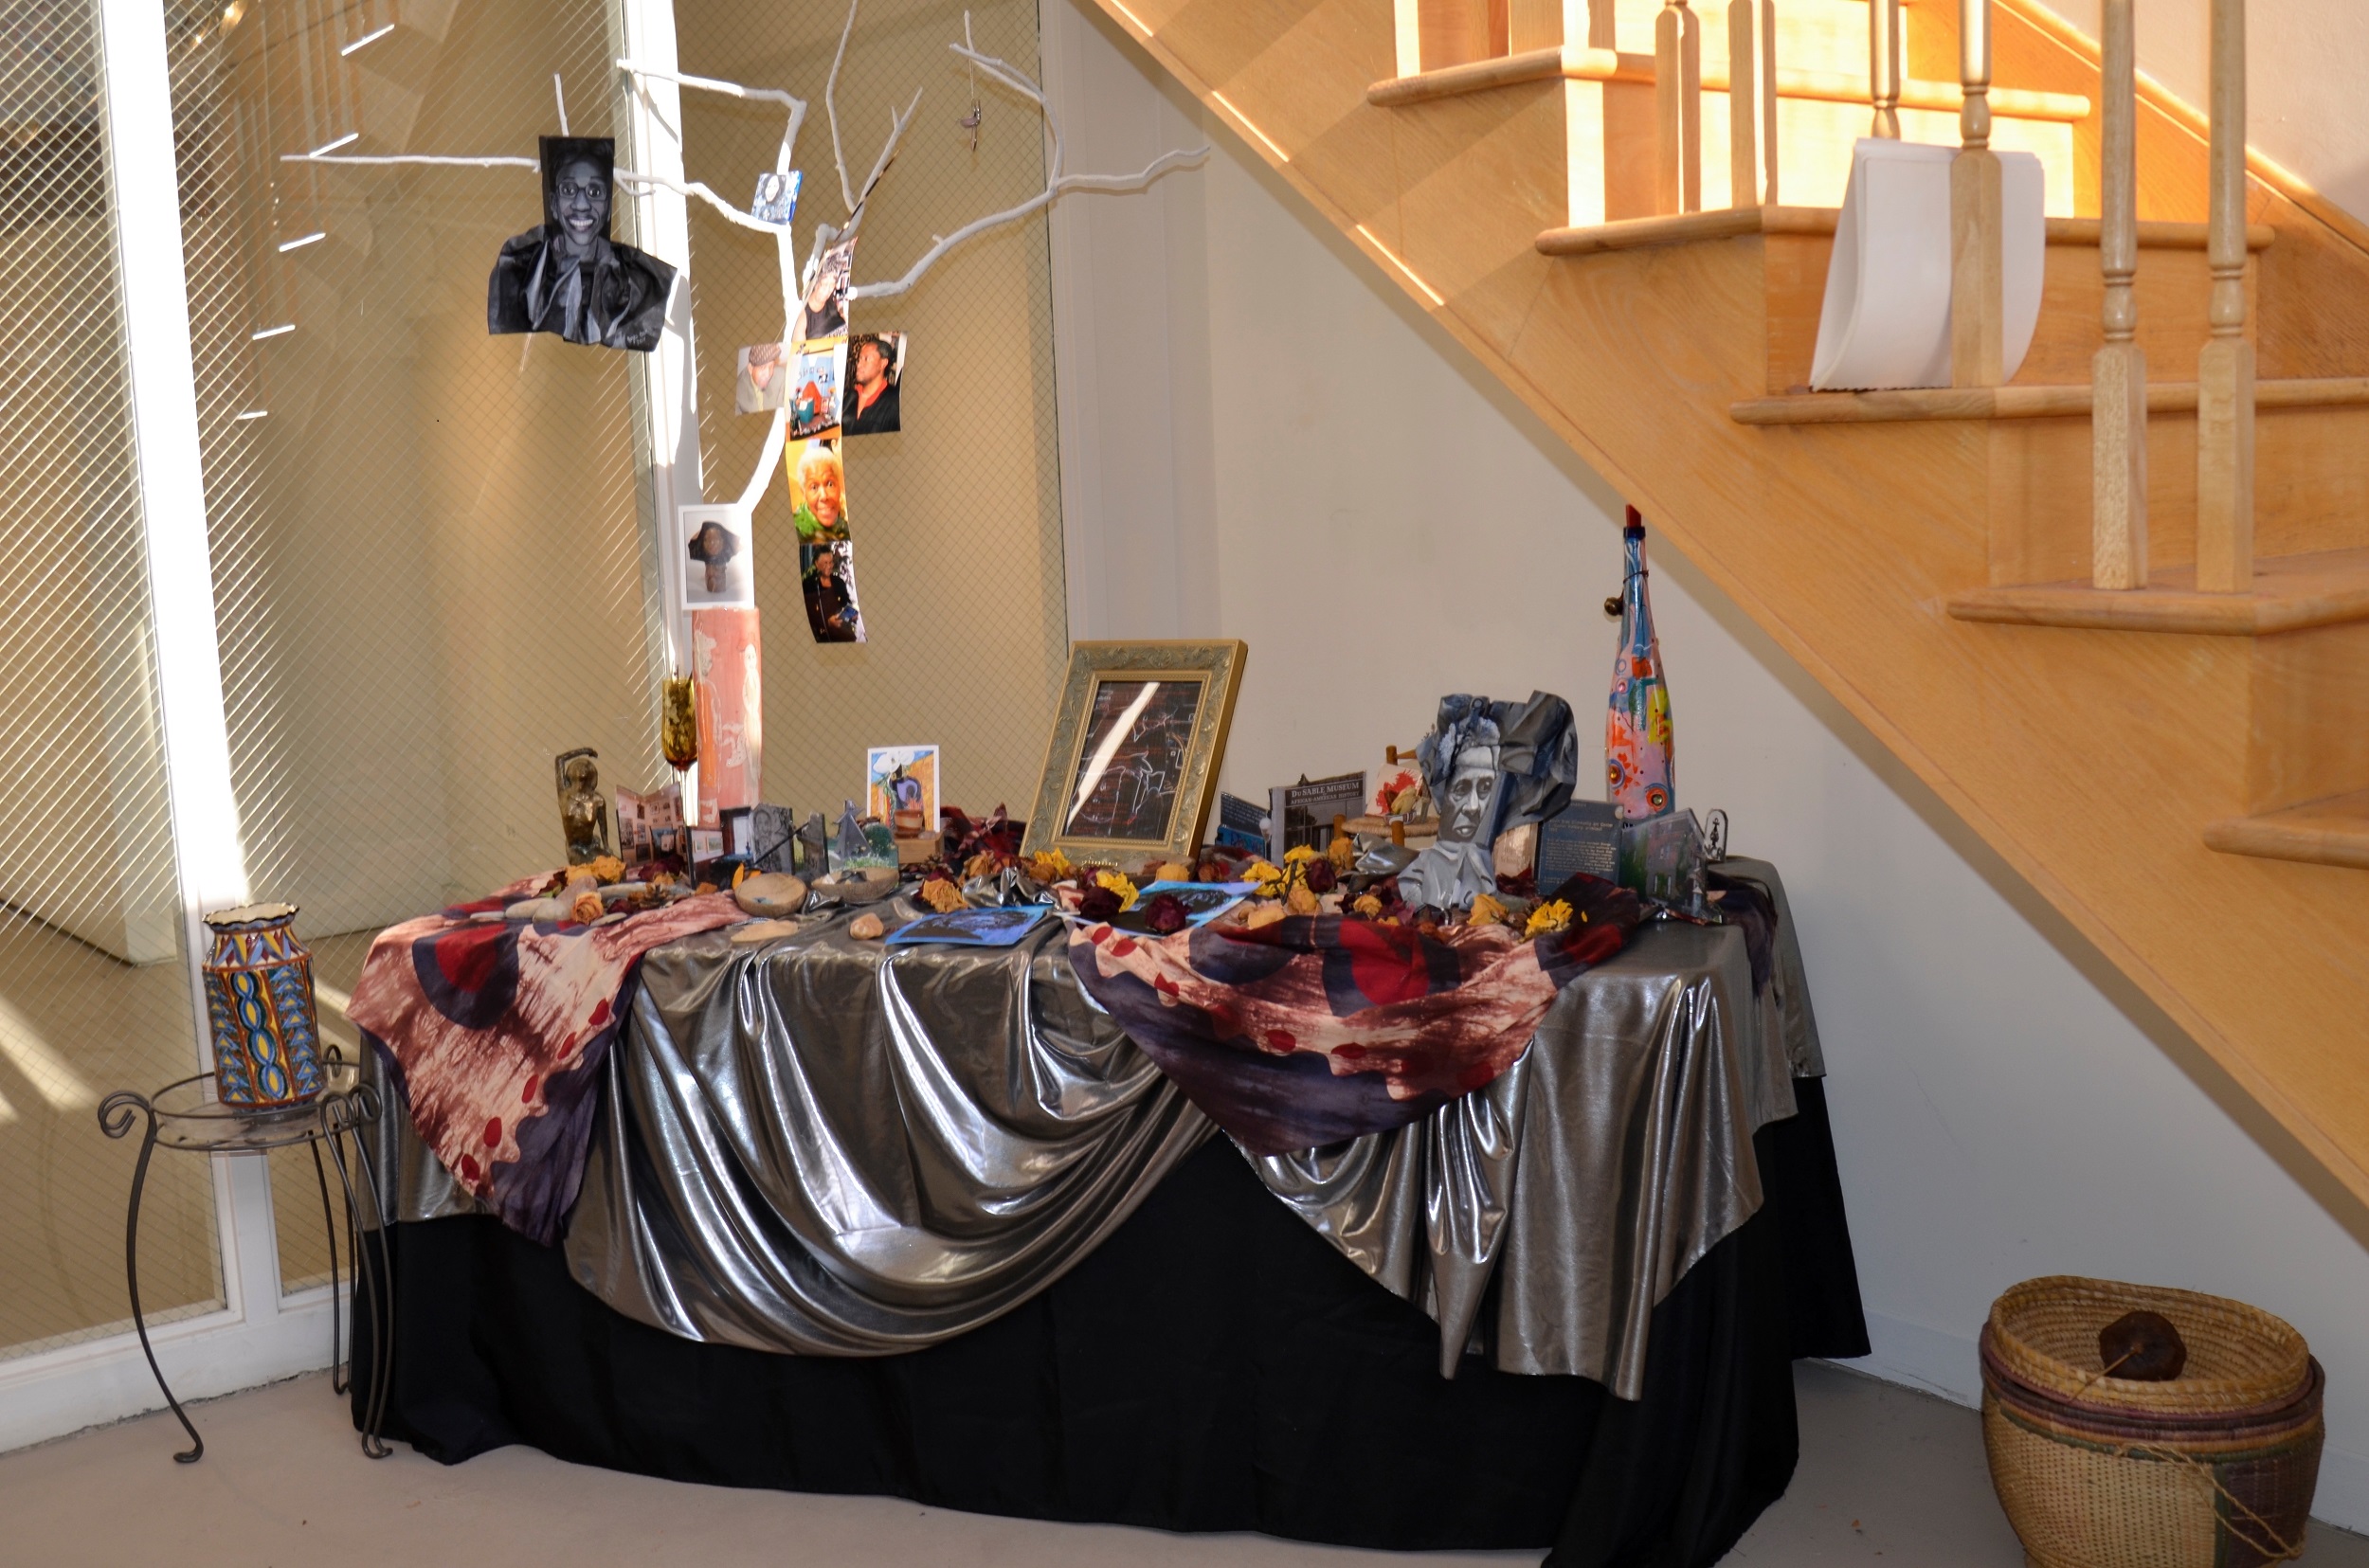 Color photograph of a table in front of a staircase, covered with a metallic cloth and various objects, including a tree branch hung with photographs